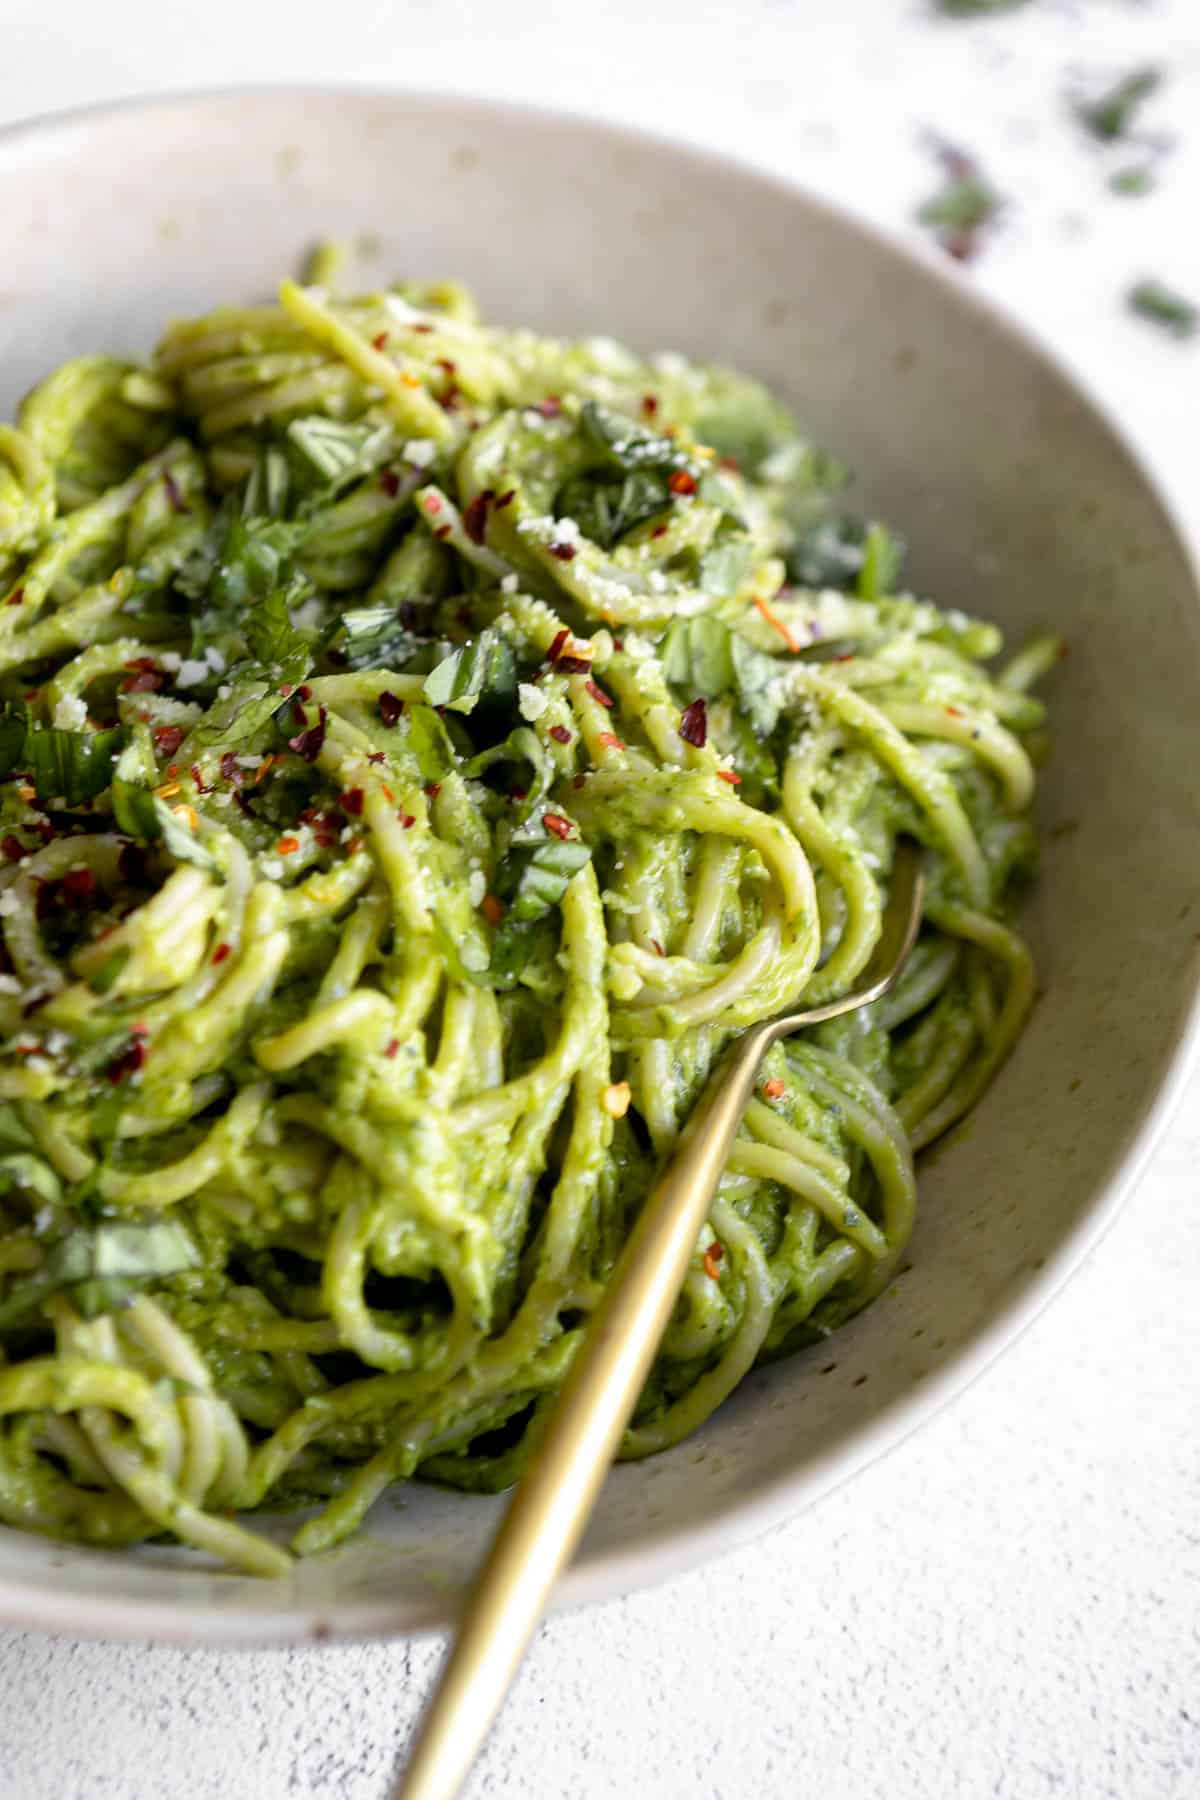 up close photo of the avocado pesto in a bowl with fresh basil